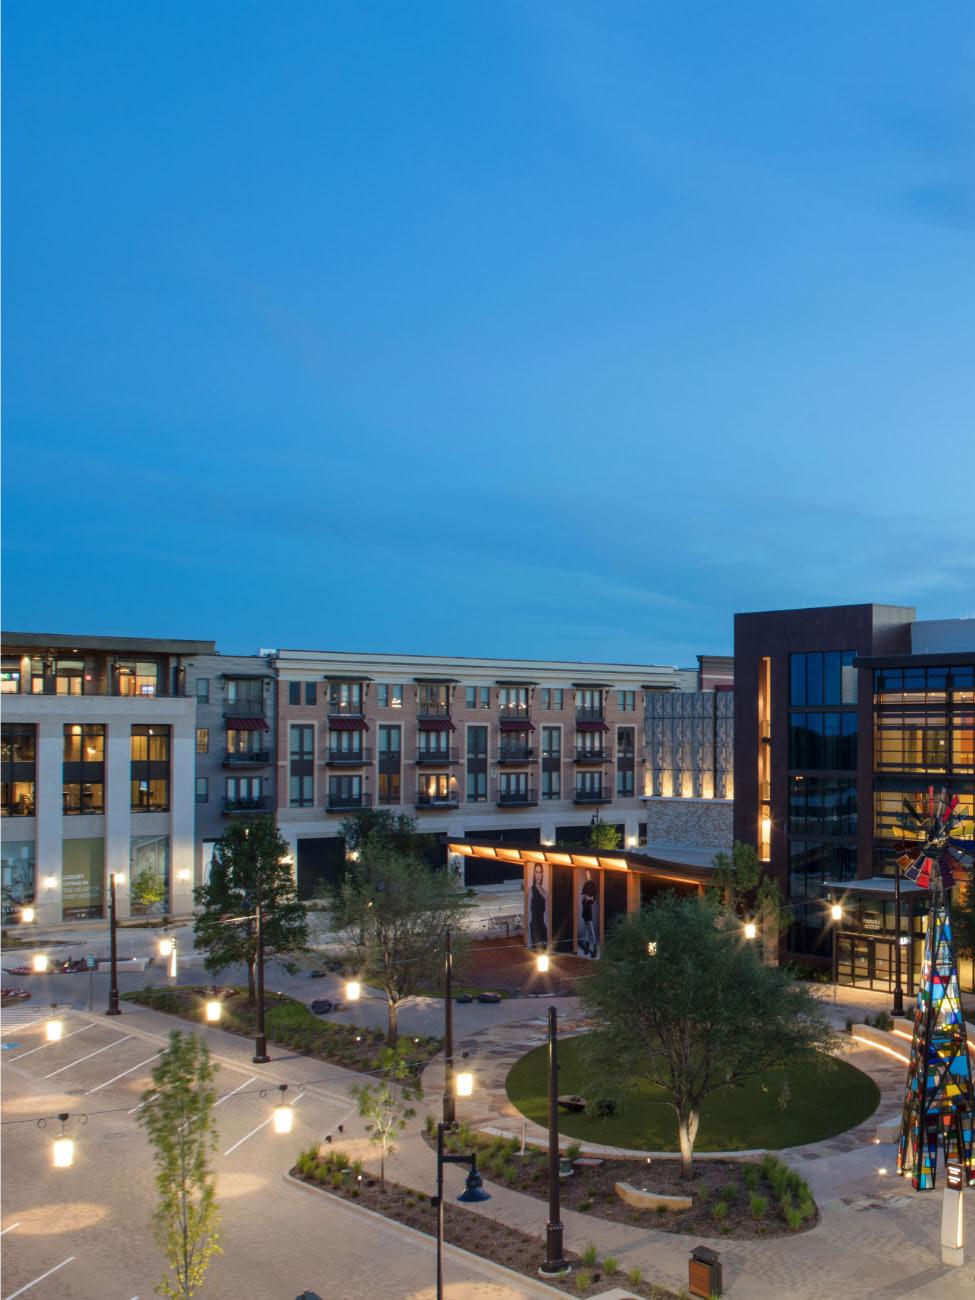 THE START OF SOMETHING BIG The Shops at Clearfork rede nes the masterplanned, mixed-use development with 270 acres of diverse residential options, miles of riverfront access and a carefully curated